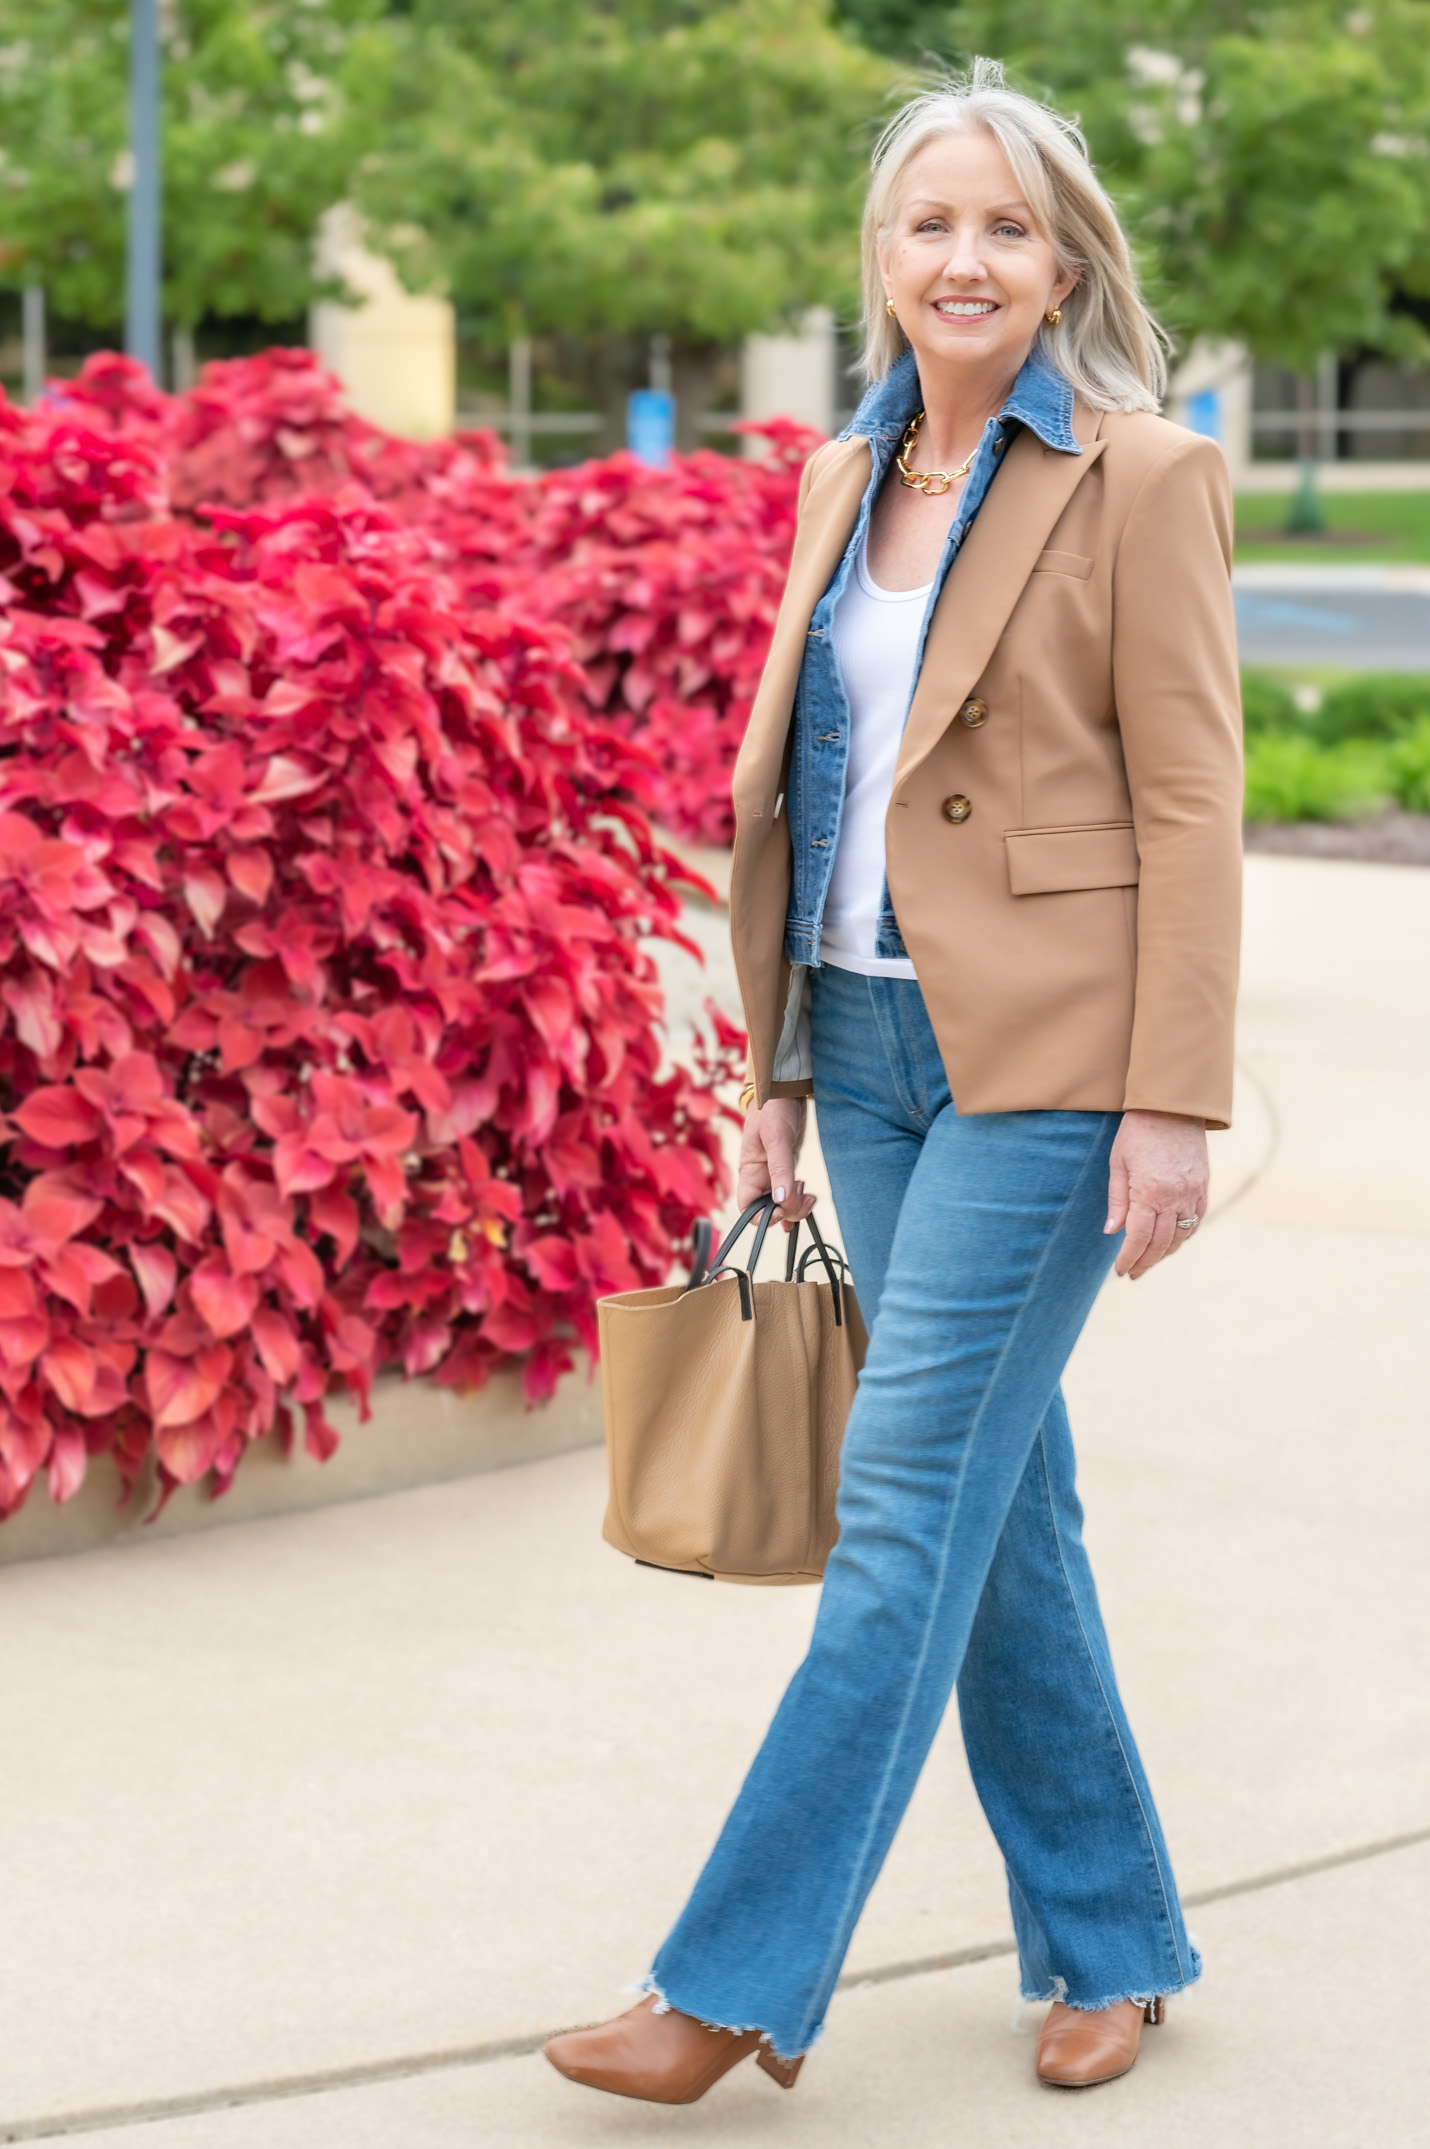 Blazer and Jeans Classic Fall Outfit